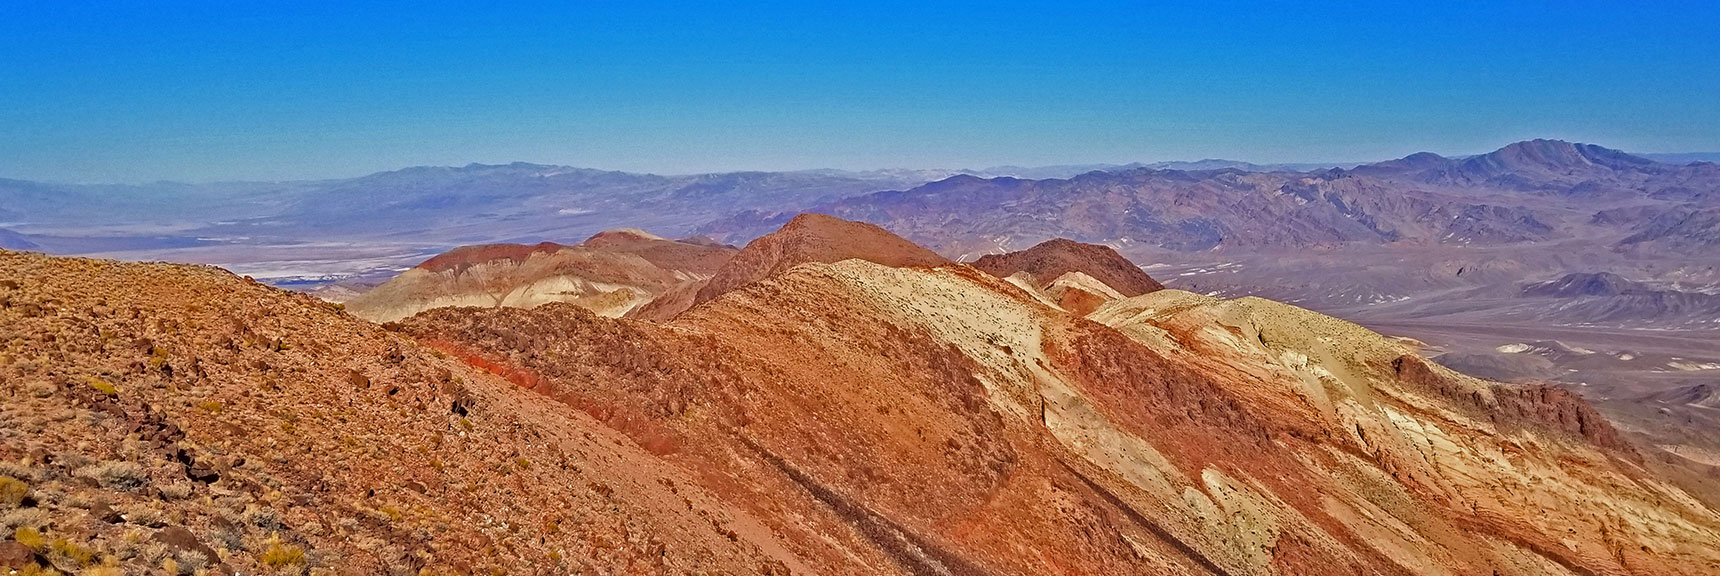 Northern View from Mt. Perry Summit | Dante's View to Mt. Perry | Death Valley National Park, CA